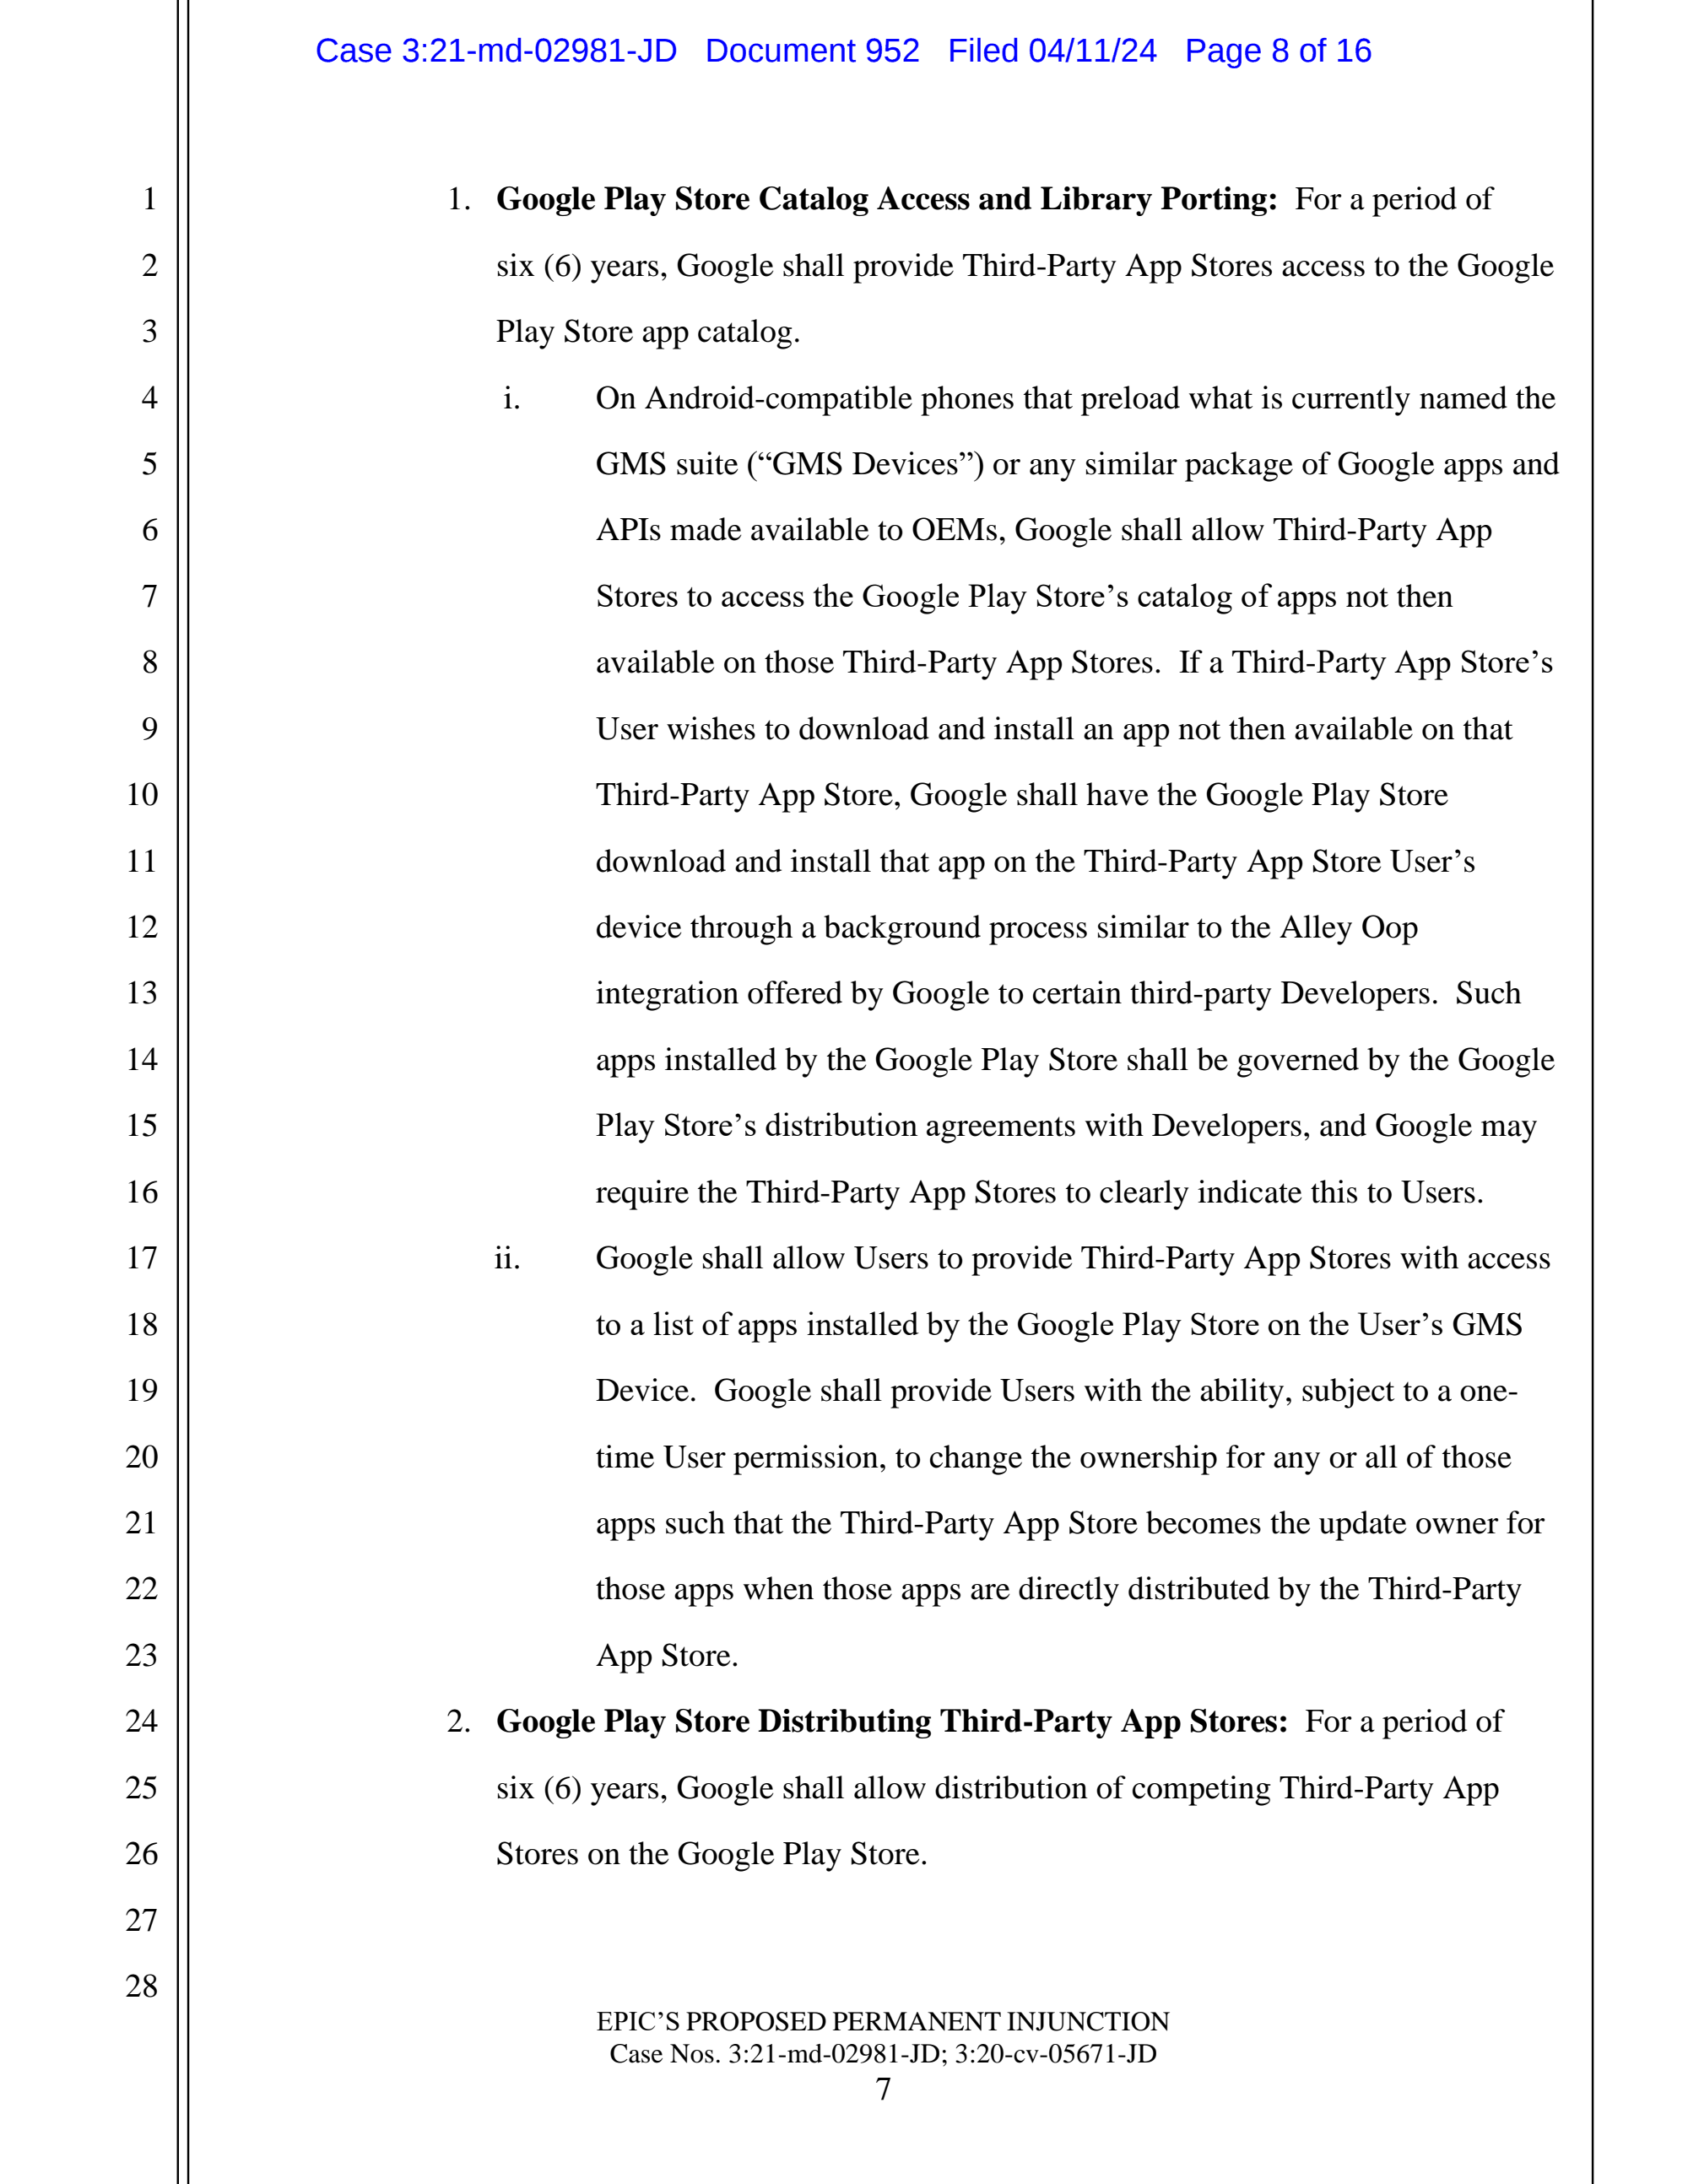 Page 8 of epic-google-proposed-permanent-injunction